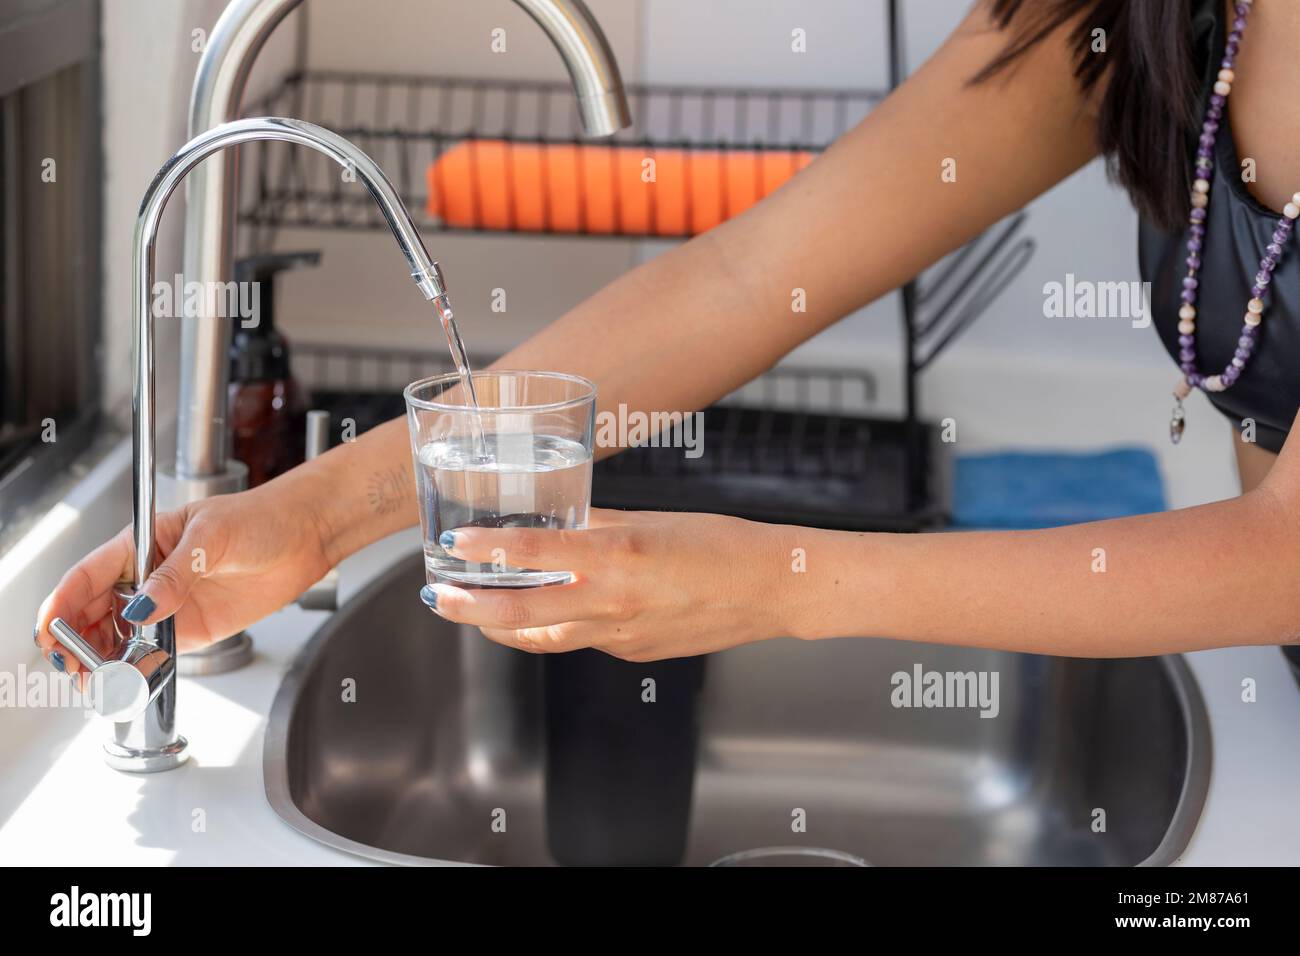 Woman's hands holding a glass that fills with water from the tap filter. Stock Photo